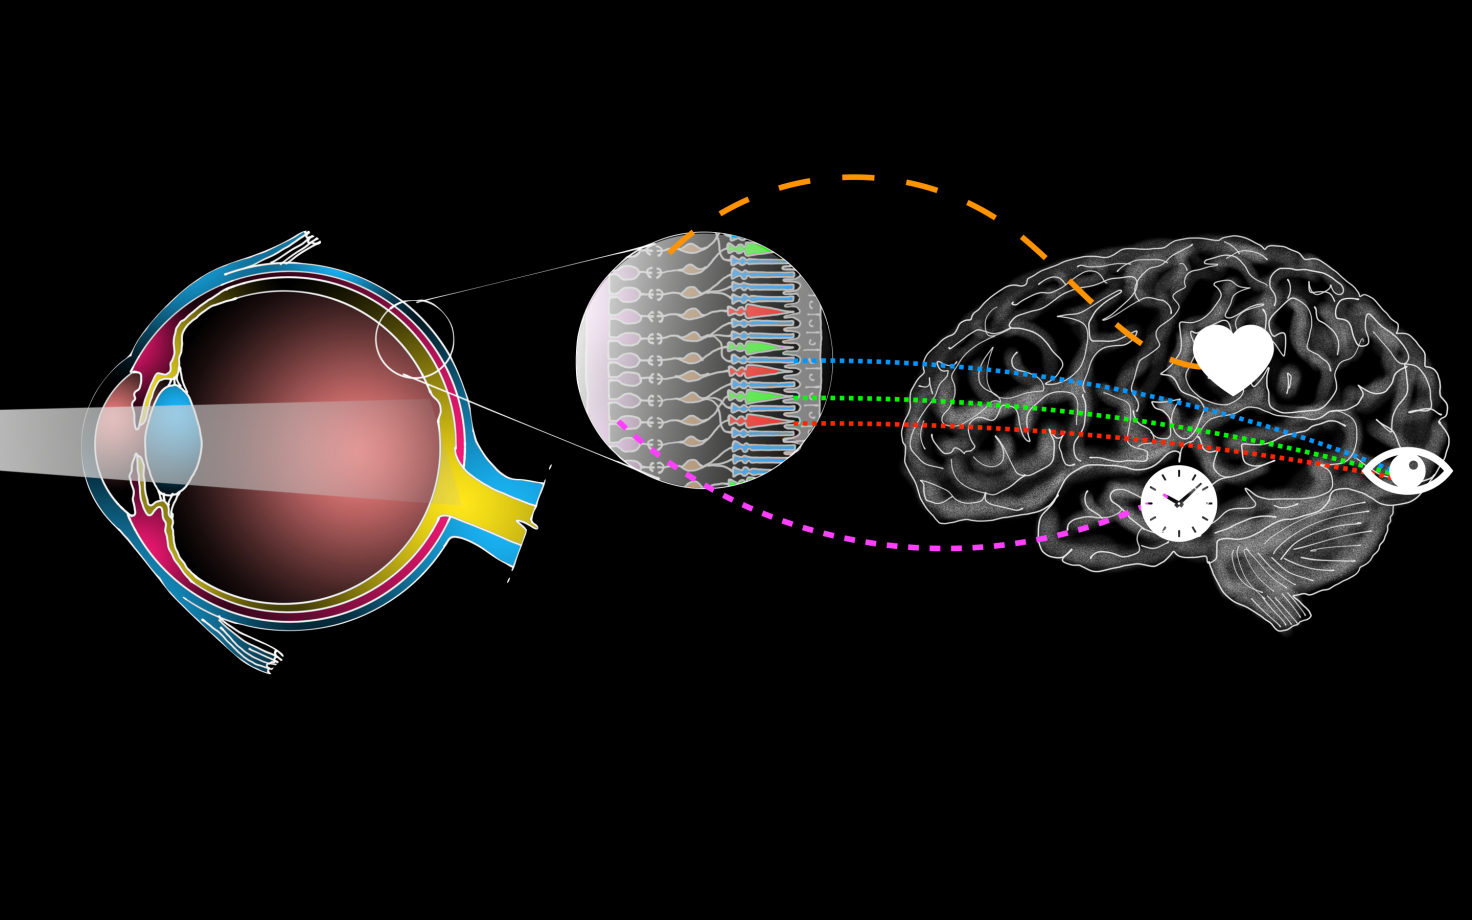 A diagram of an eye on the left and a brain on the right